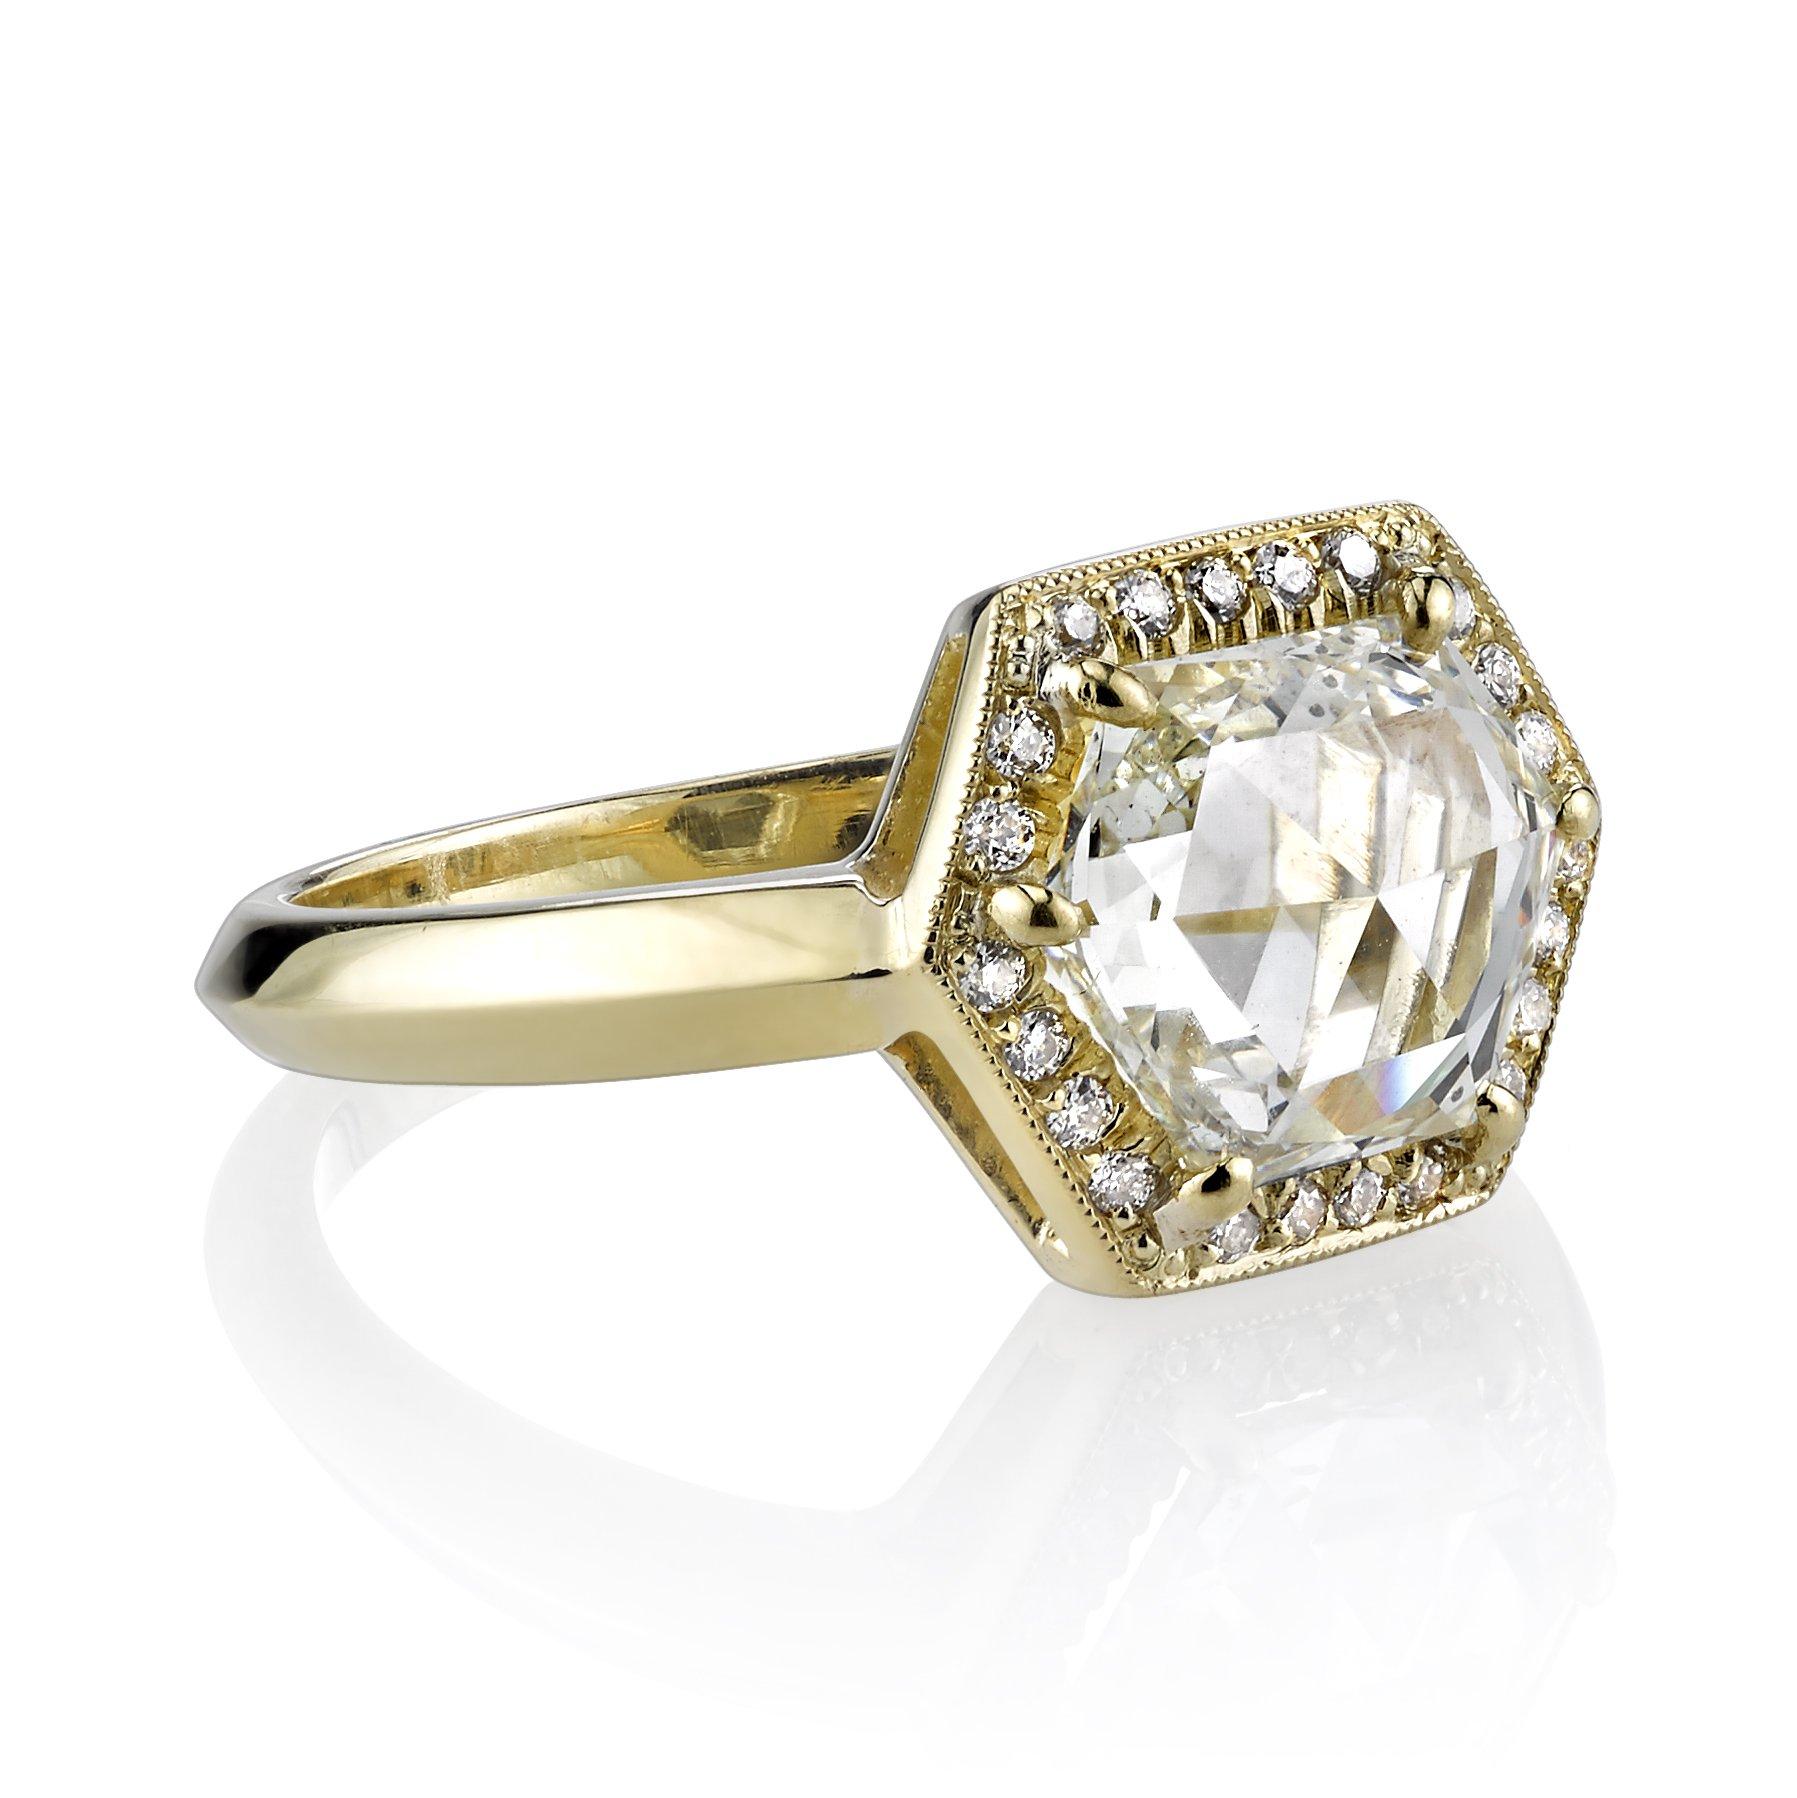 1.66ct J/SI1 GIA certified trapezoid shaped rose cut diamond with 0.13ctw old European cut accent diamonds set in a handcrafted 18K yellow gold mounting. 
